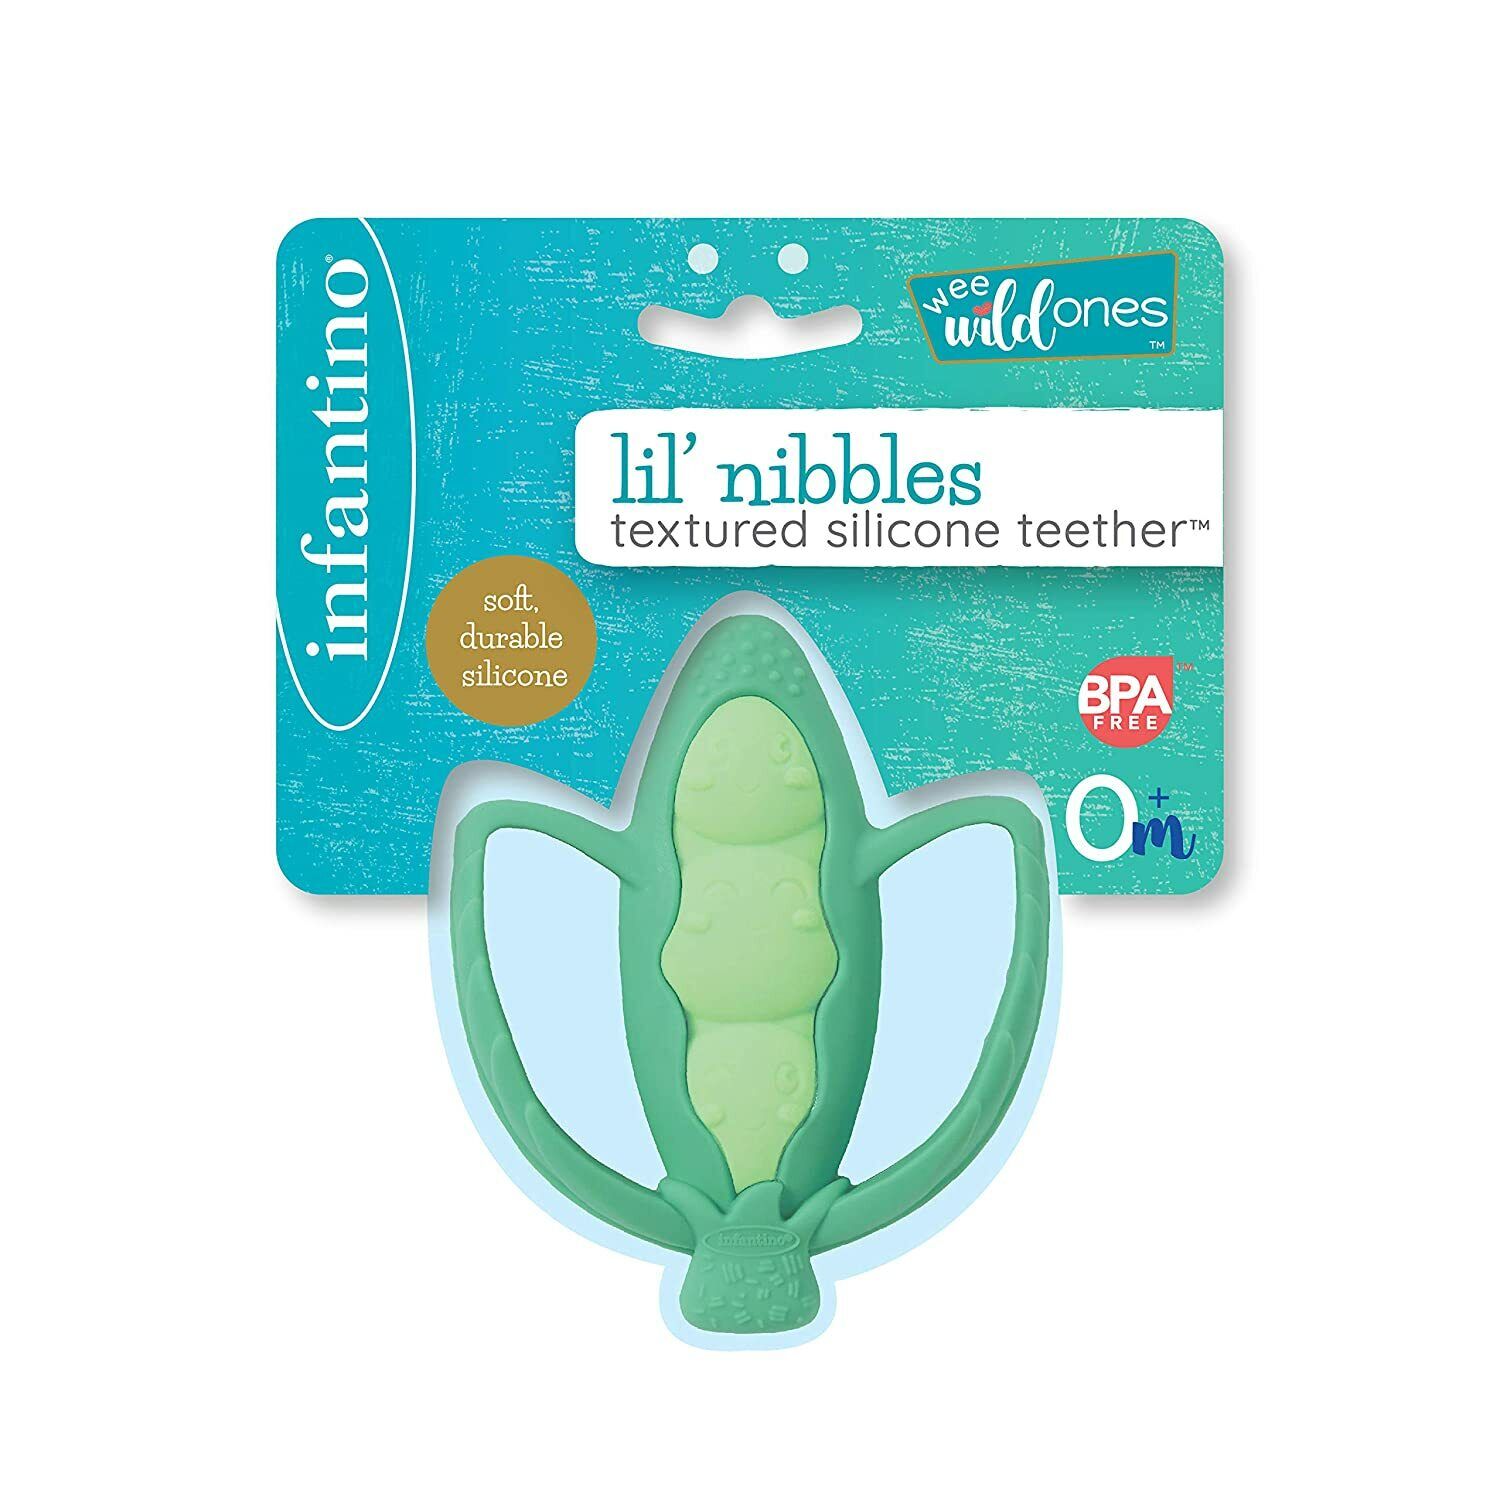 Infantino Lil' Nibble Teethers Pea Pod - Silicone Soft-Textured teether for Sens